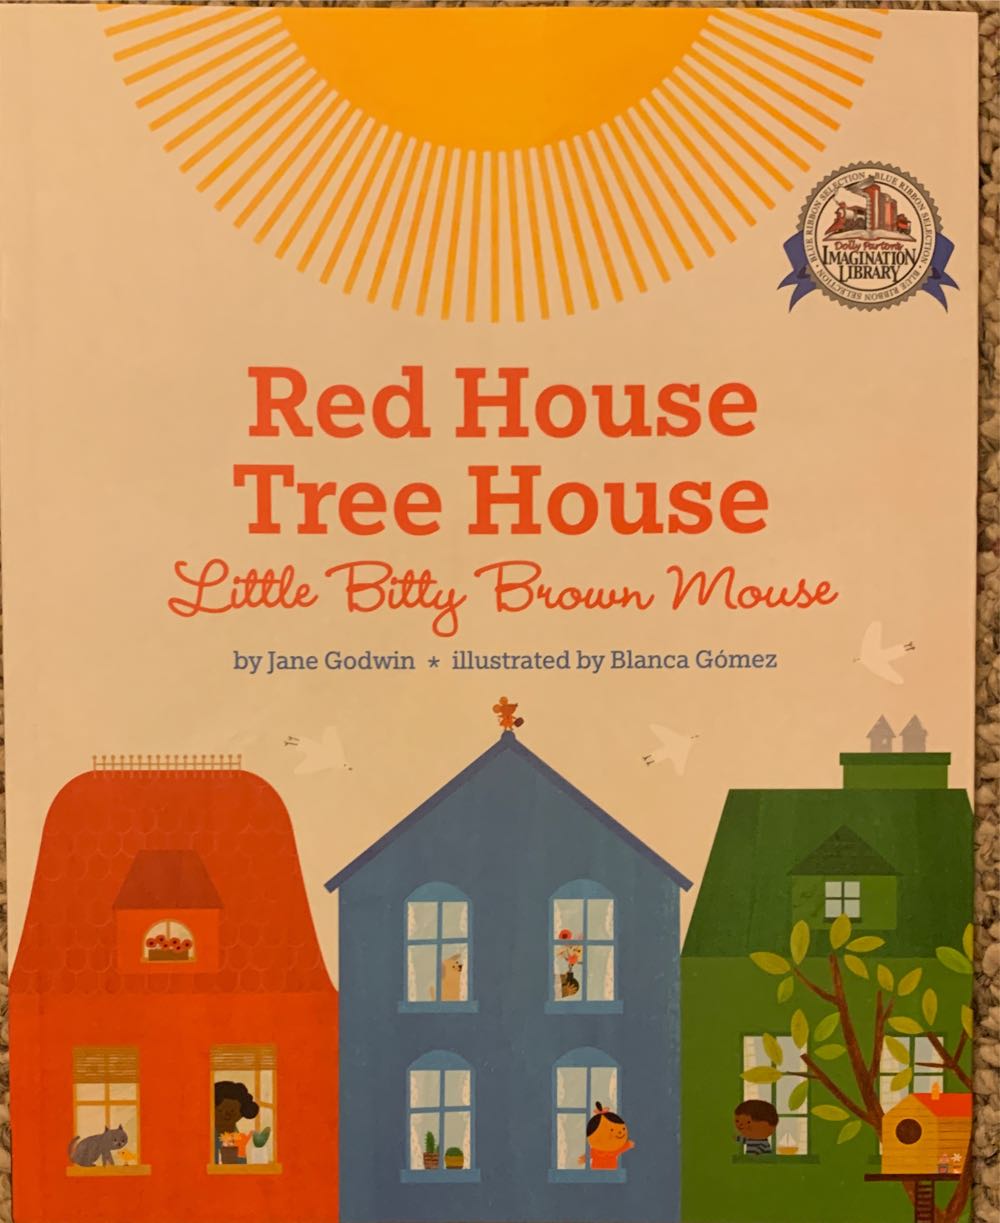 Red House, Tree House, Little Bitty Brown Mouse - Jane Godwin book collectible [Barcode 9780593111772] - Main Image 1